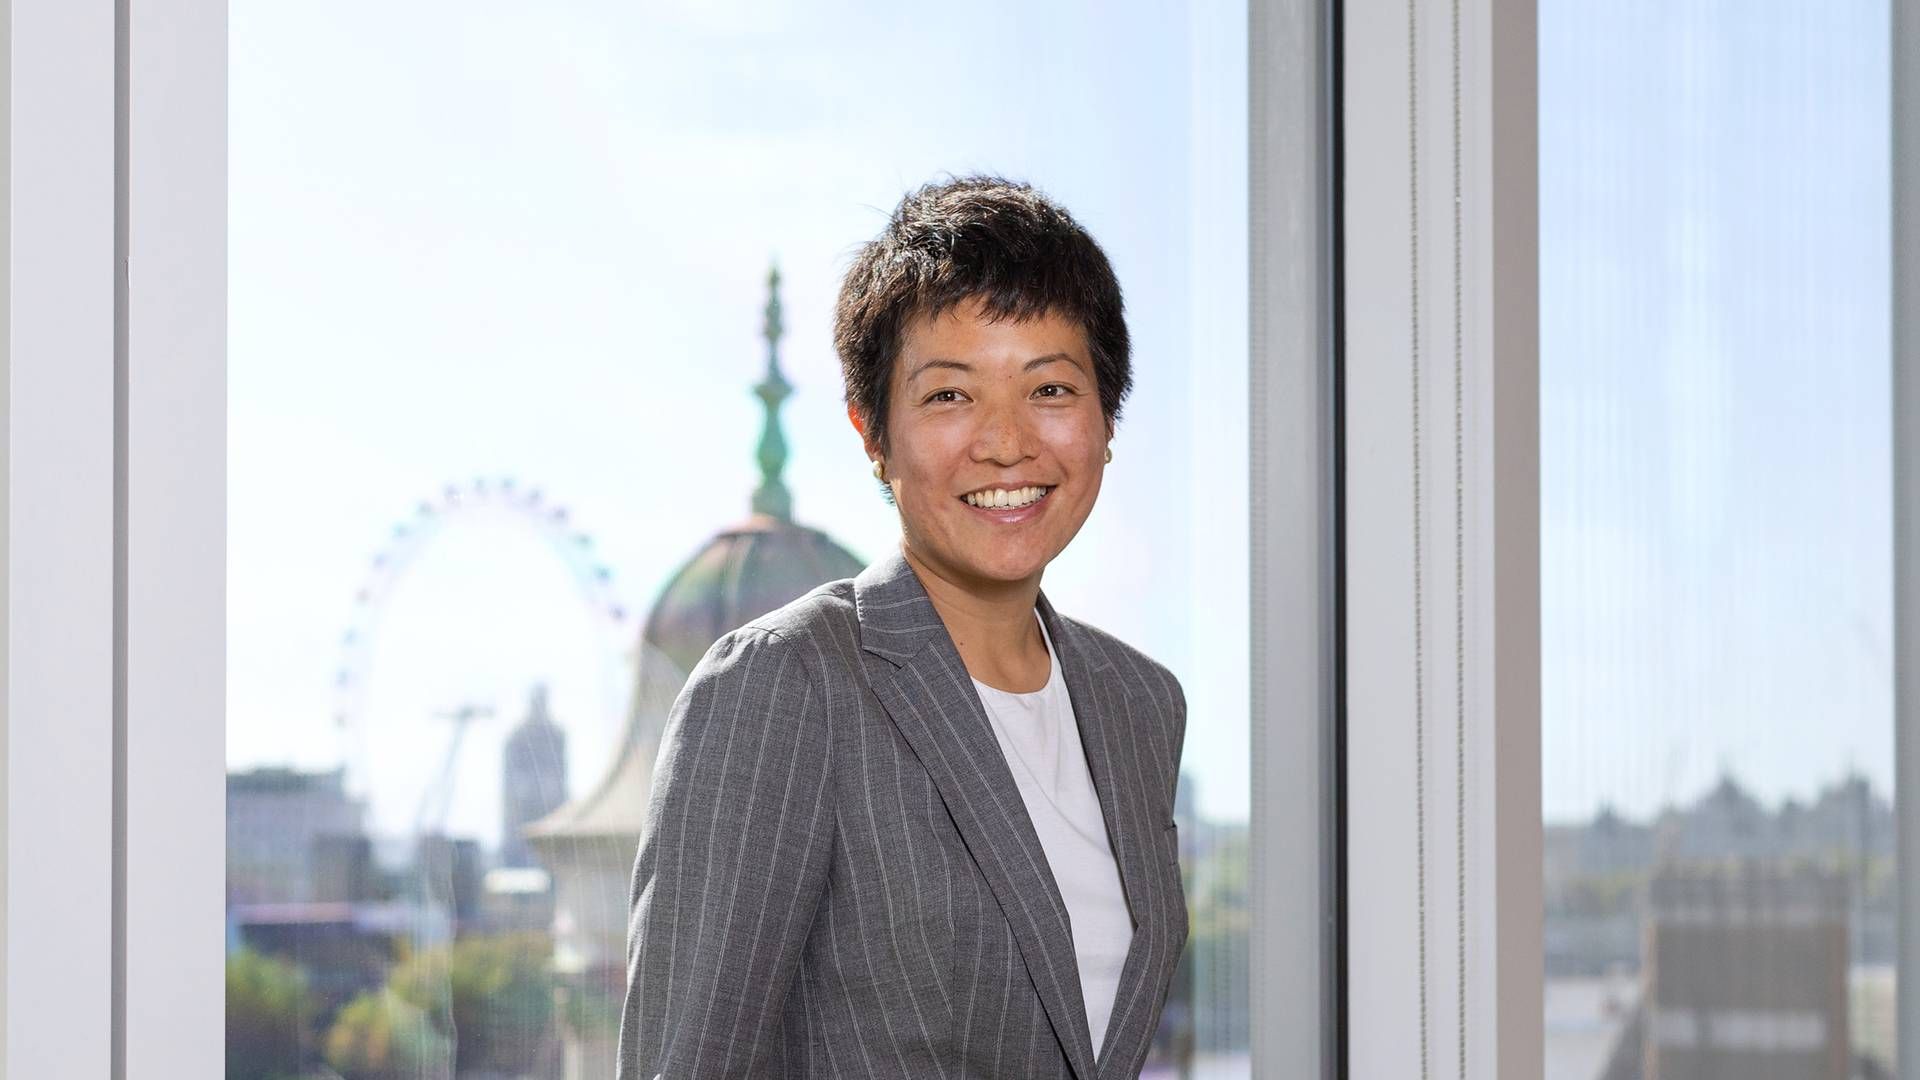 The Nordic countries are pioneers in the new era of sustainable investing, Jennifer Wu says. | Photo: Vivian Birch / J.P. Morgan Asset Management / PR